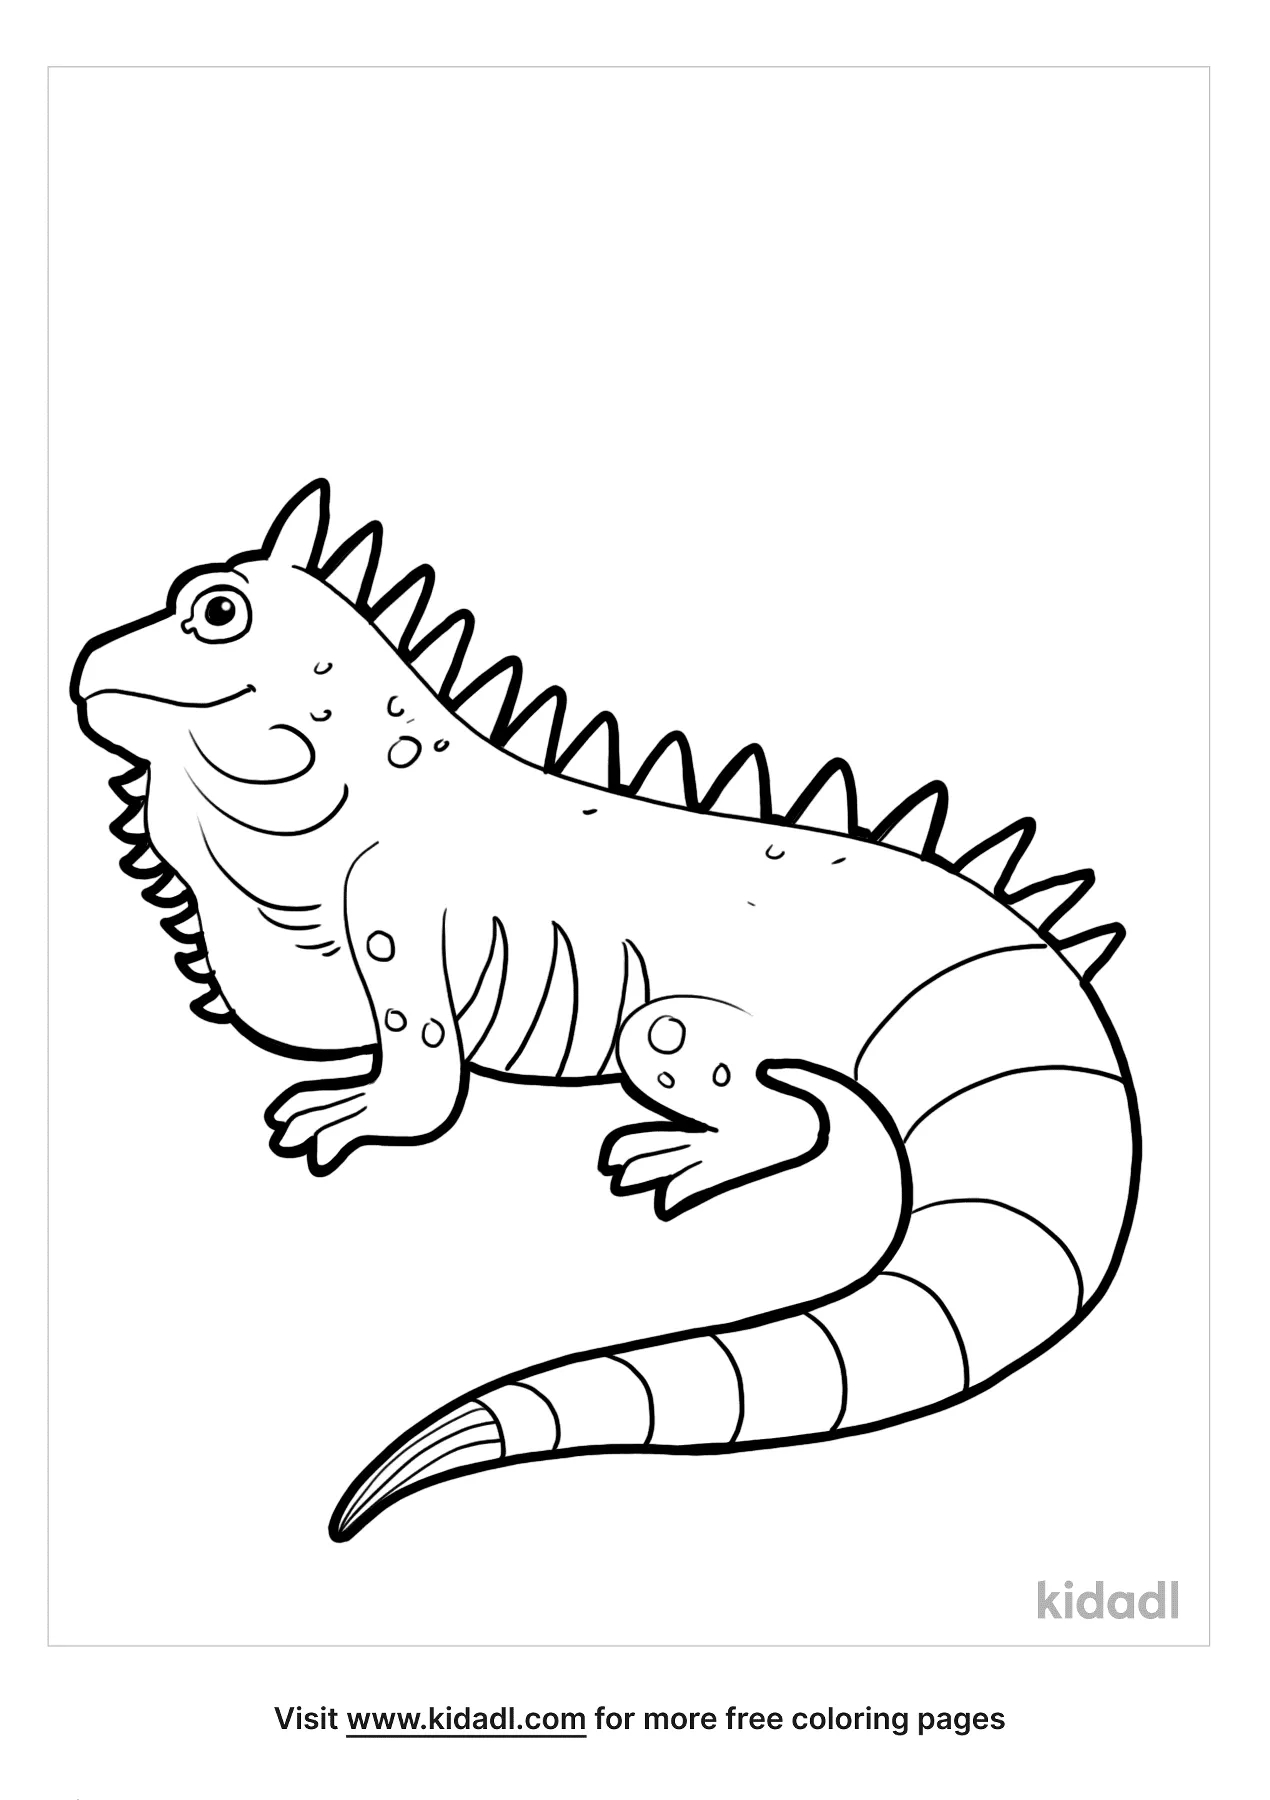 Iguana Coloring Pages Free Animals Coloring Pages Kidadl